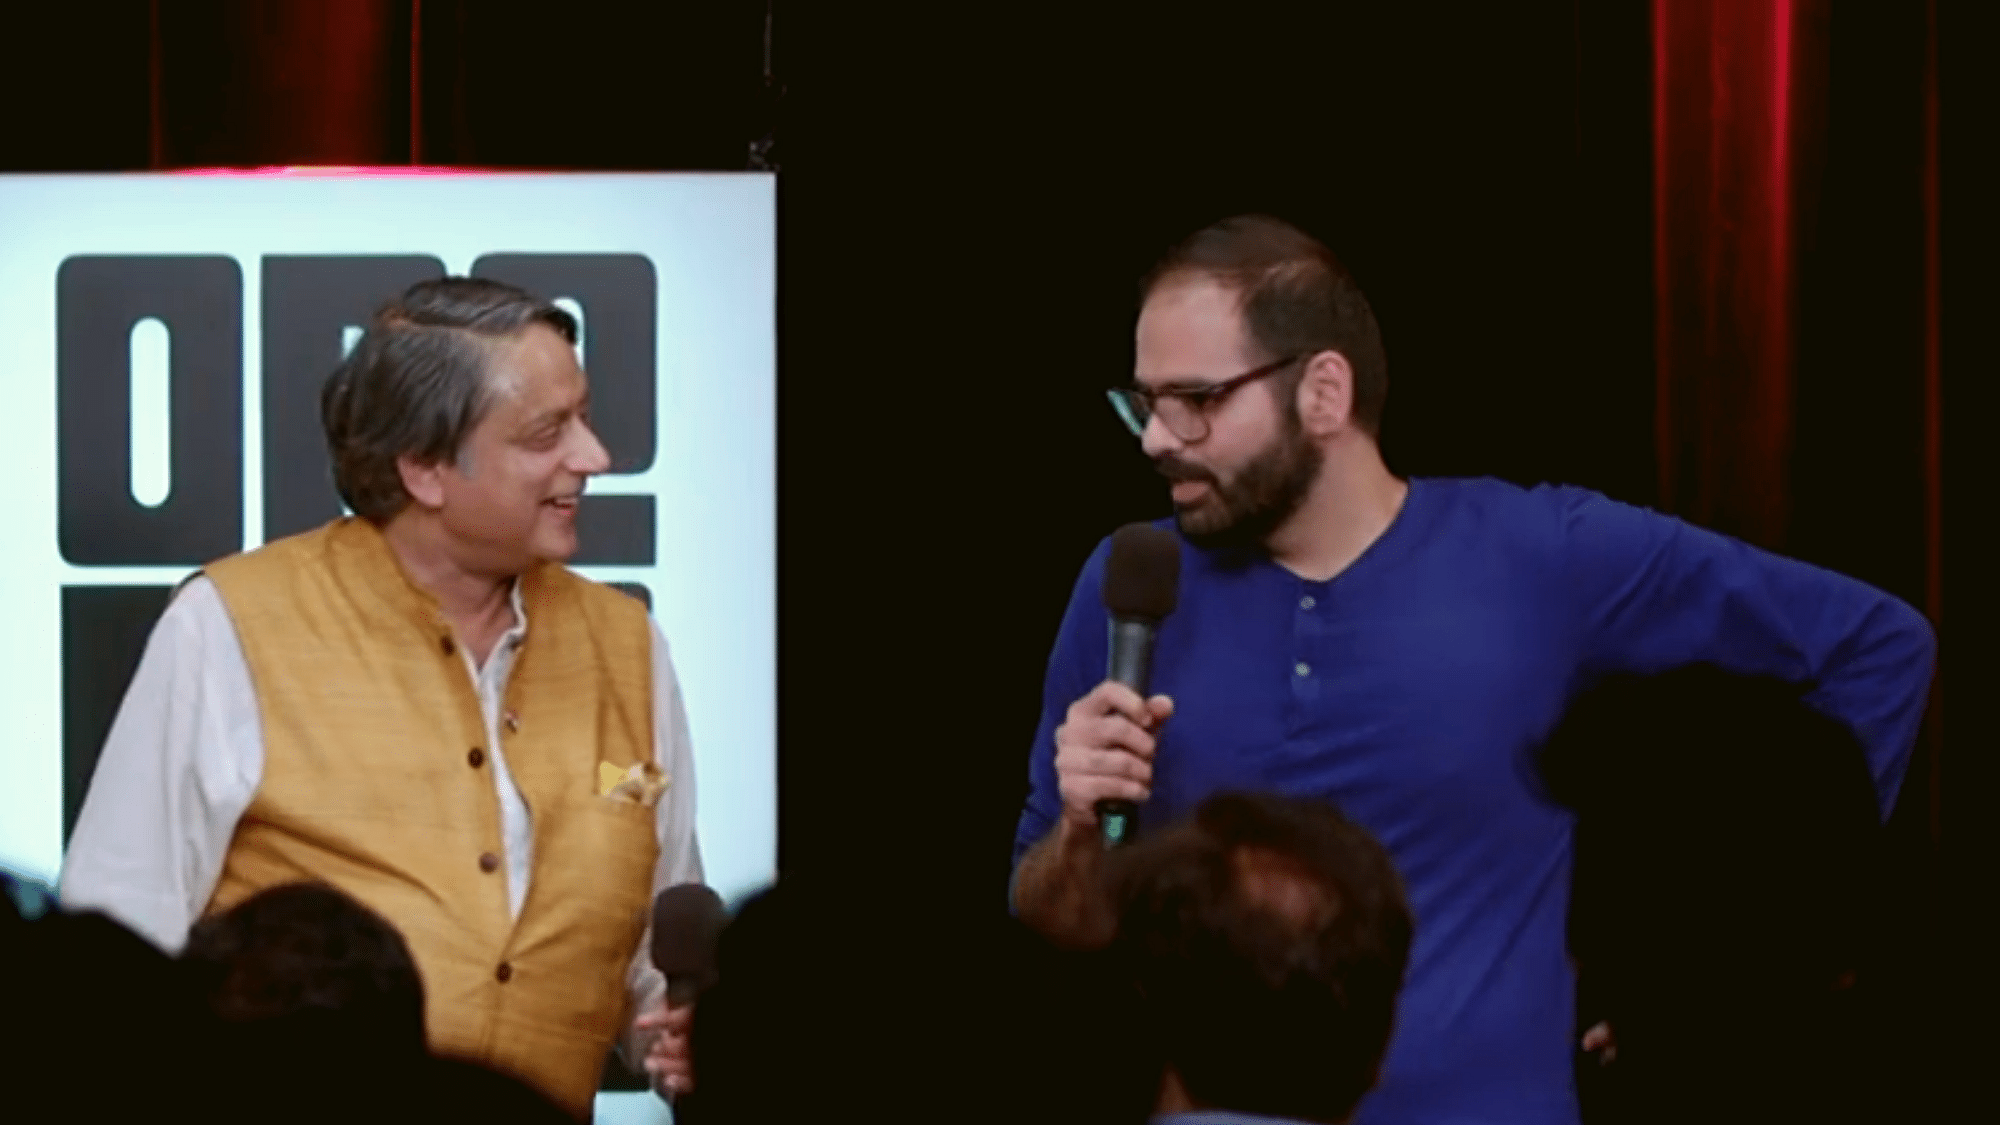 Tharoor’s comedy mentor for the show ‘One Mic Stand’ was troll-proclaimed “anti-national” and secret-Modi-fanboy-who-doesn’t-admit-it, Kunal Kamra.